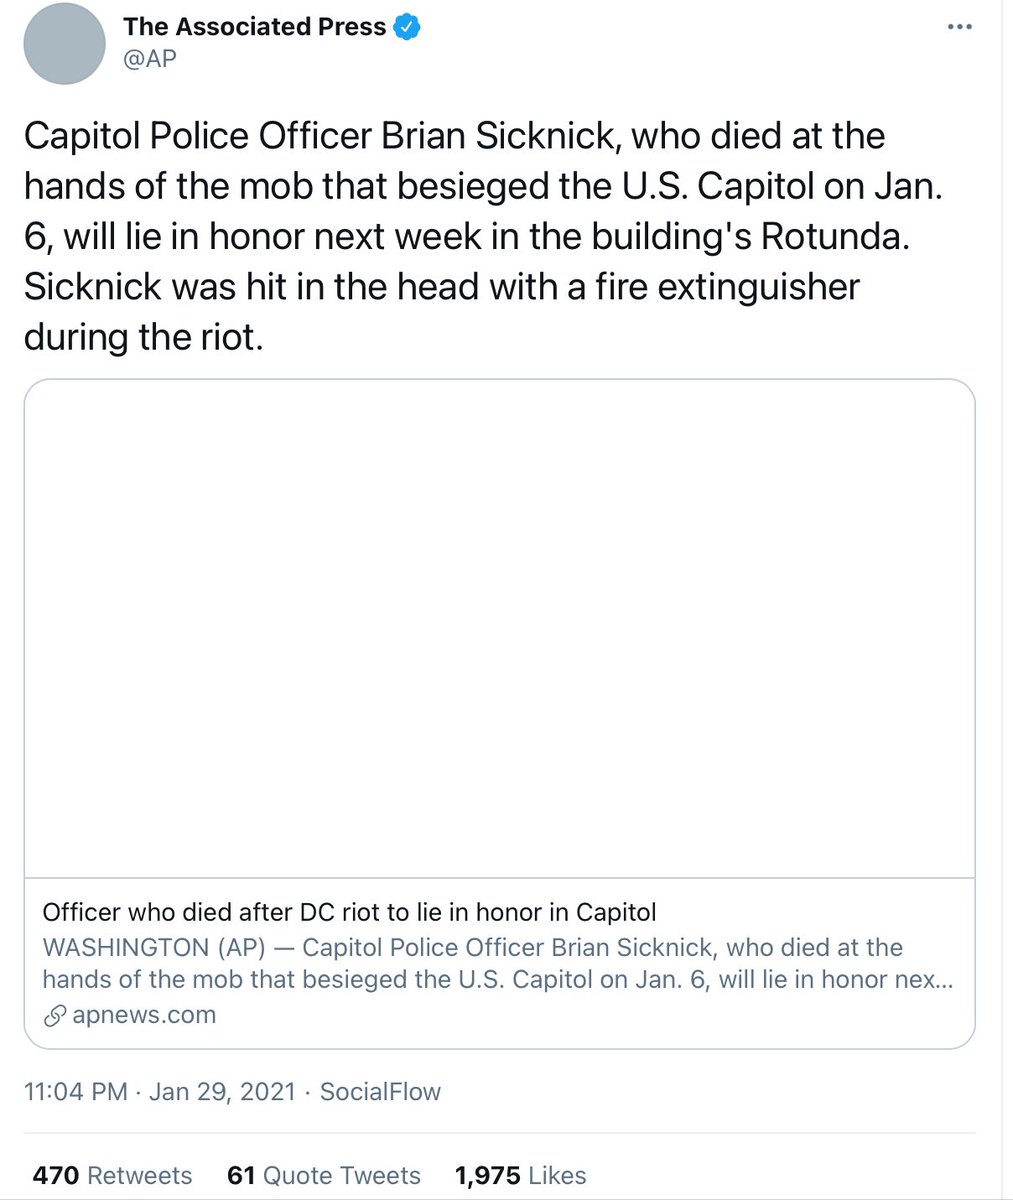 Just an absolute falsehood about how Officer Brian Sicknick died, spread over and over by the people with the largest media platforms, to millions and millions of people who will probably never learn that they were deceived yet again.